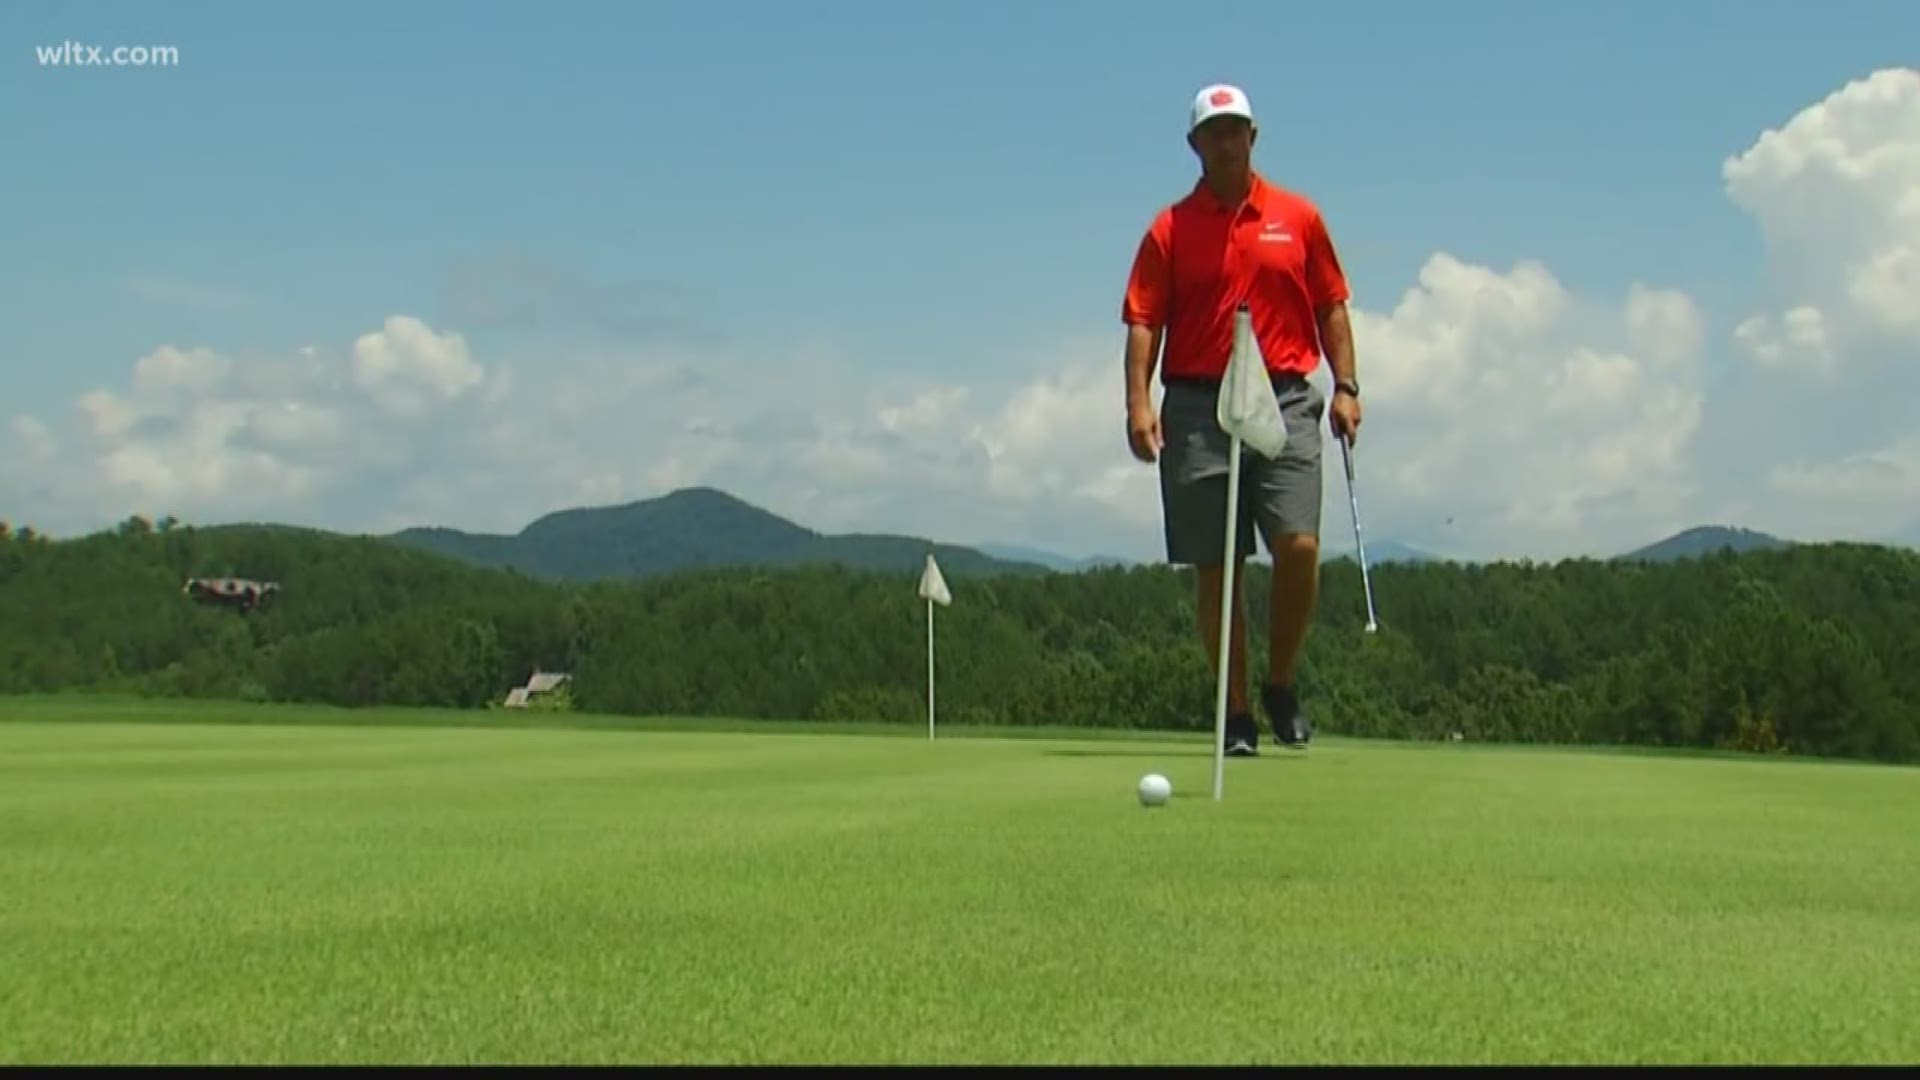 Clemson head football coach Dabo Swinney hosted his annual media golf outing Tuesday at The Reserve at Lake Keowee. Swinney gave a preview of his 10th season as the Tigers' head coach.